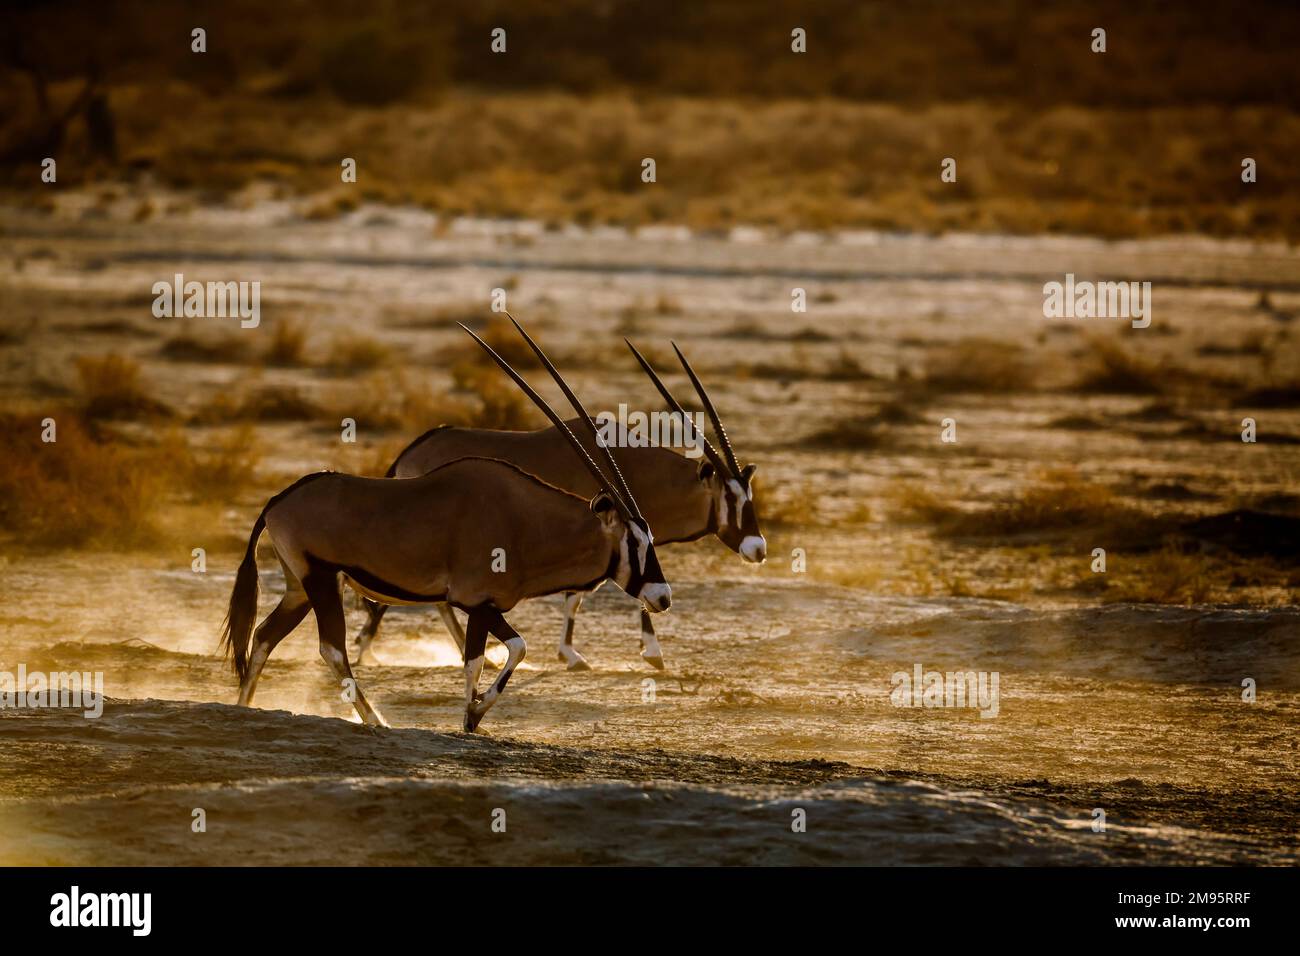 Two South African Oryx walking in sand at sunset in Kgalagadi transfrontier park, South Africa; specie Oryx gazella family of Bovidae Stock Photo